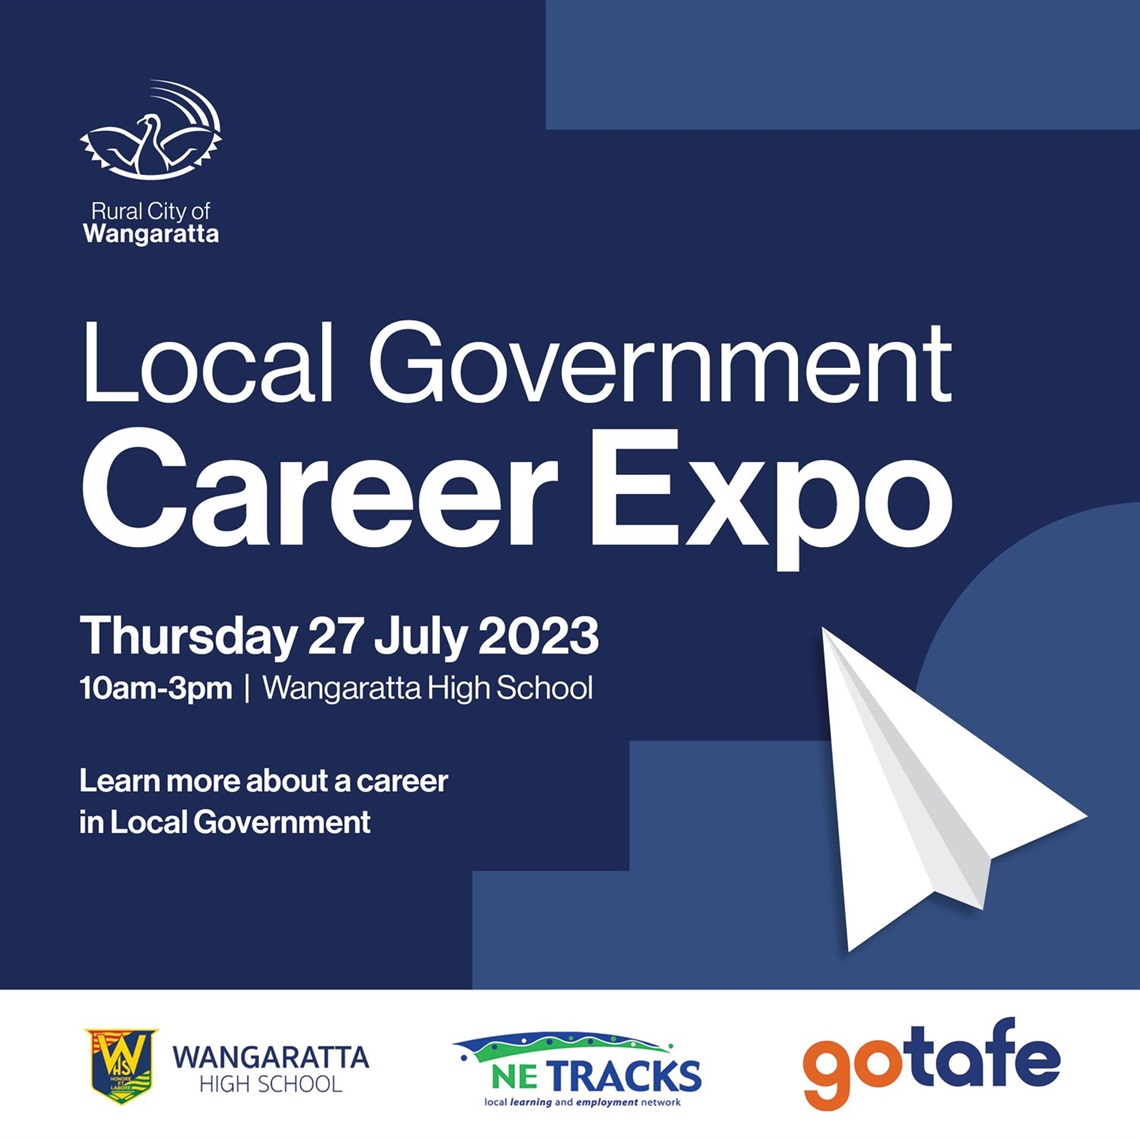 RCOW-285 Local Government Career Expo Social Tile.jpg